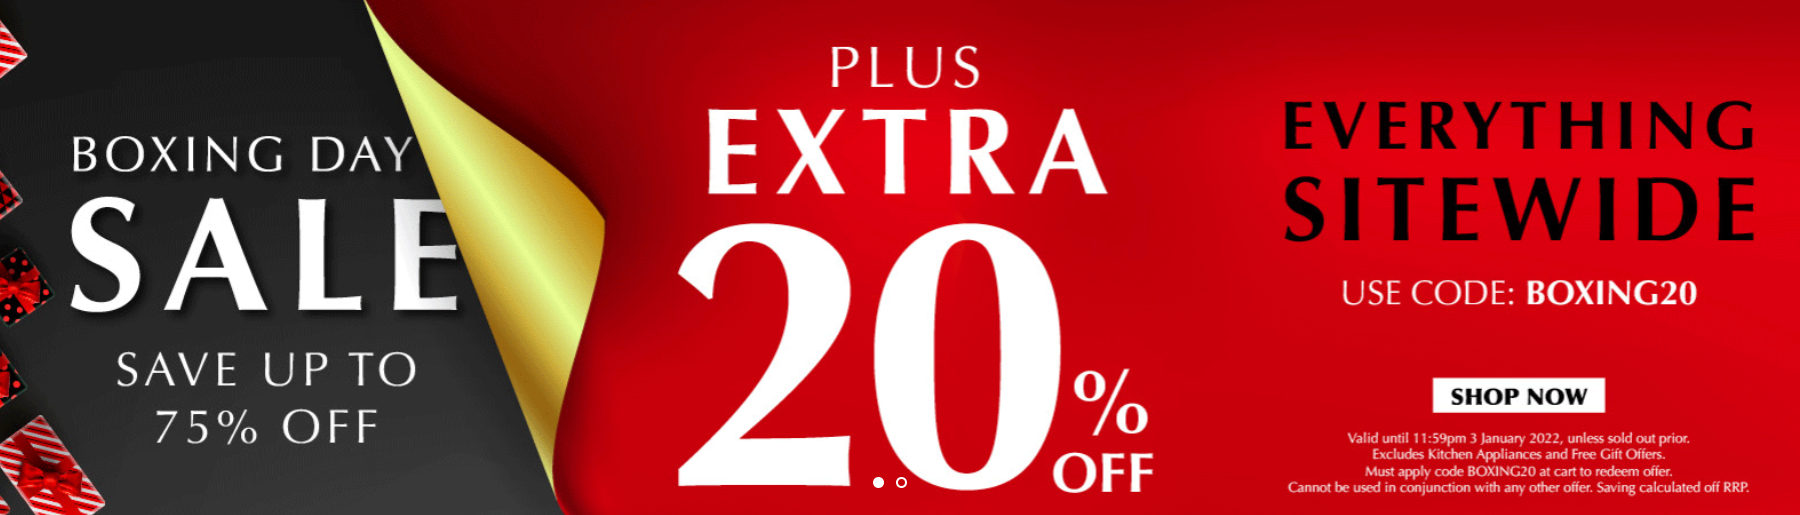 Baccarrat Boxing Day - Up to 75% OFF RRP + extra 20% OFF with coupon